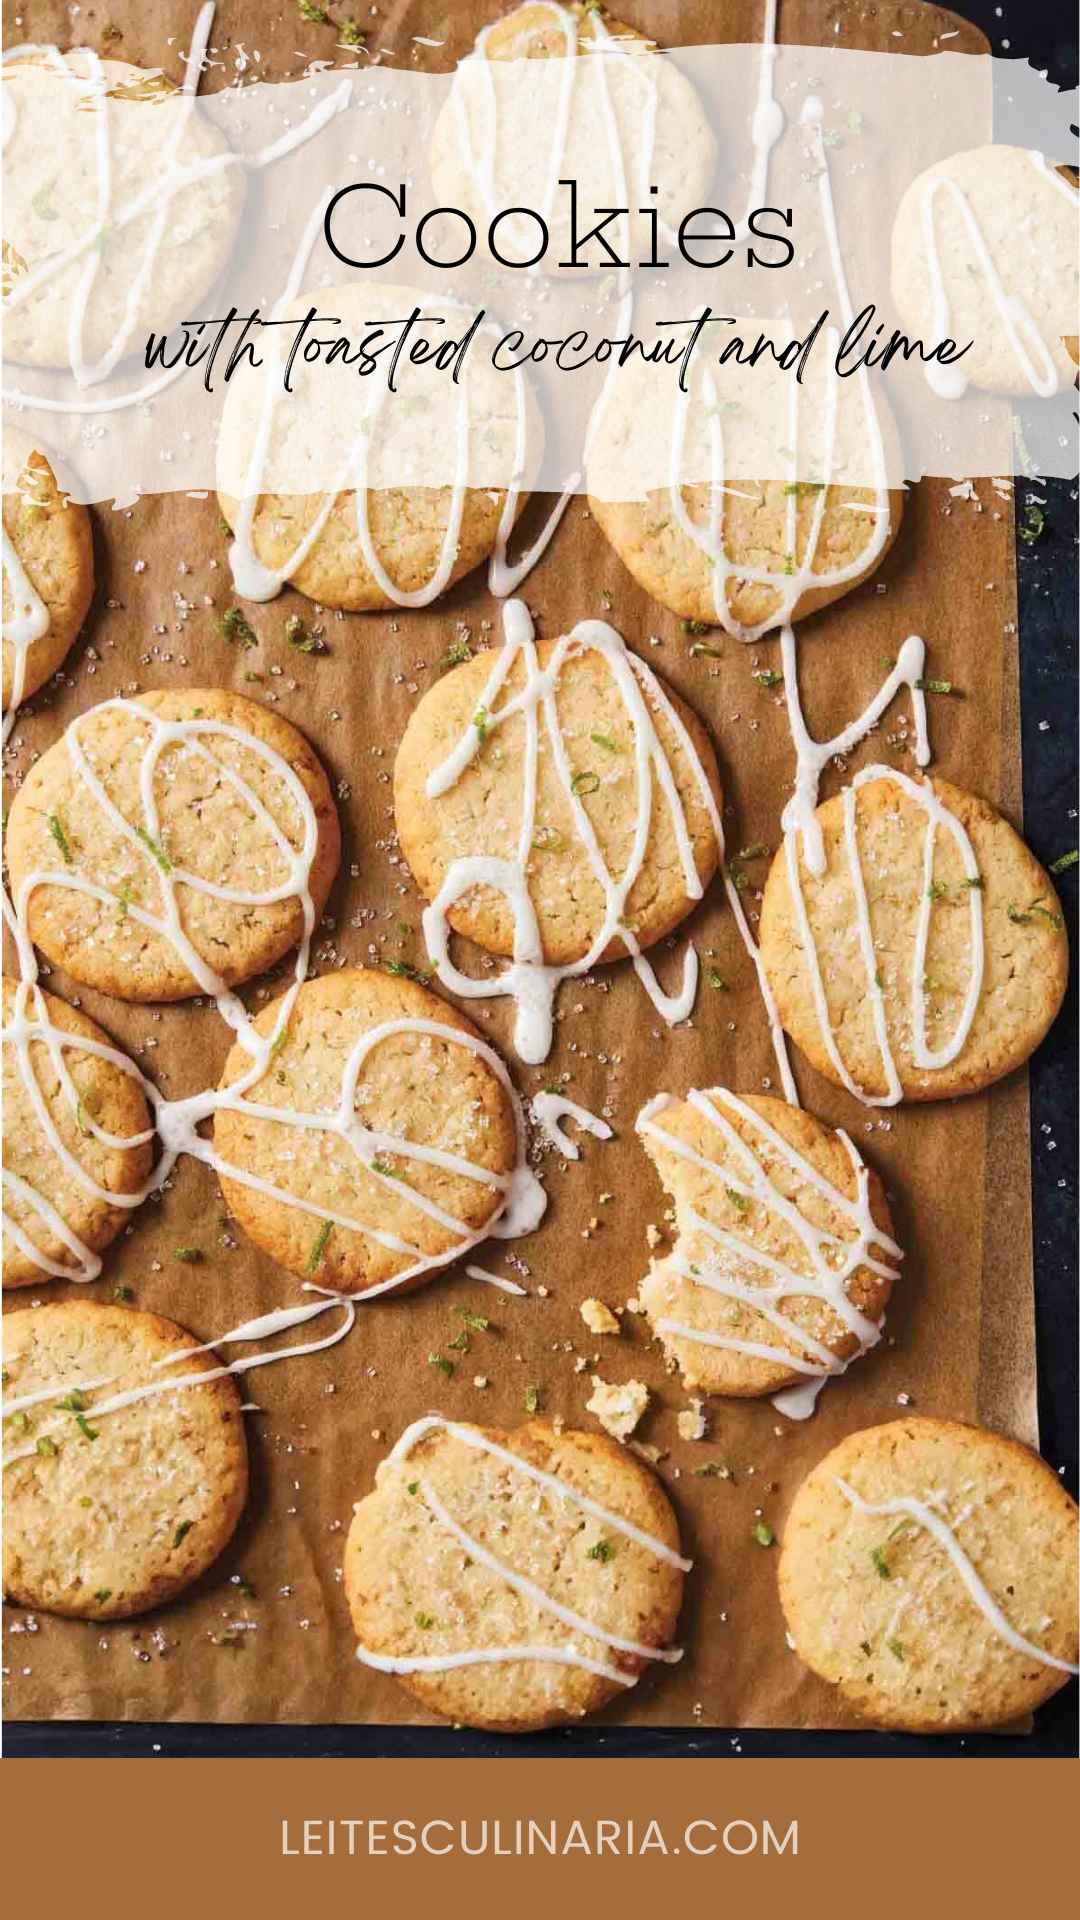 Several coconut lime cookies drizzled with glaze and sprinkled with lime zest on a wooden cutting board.